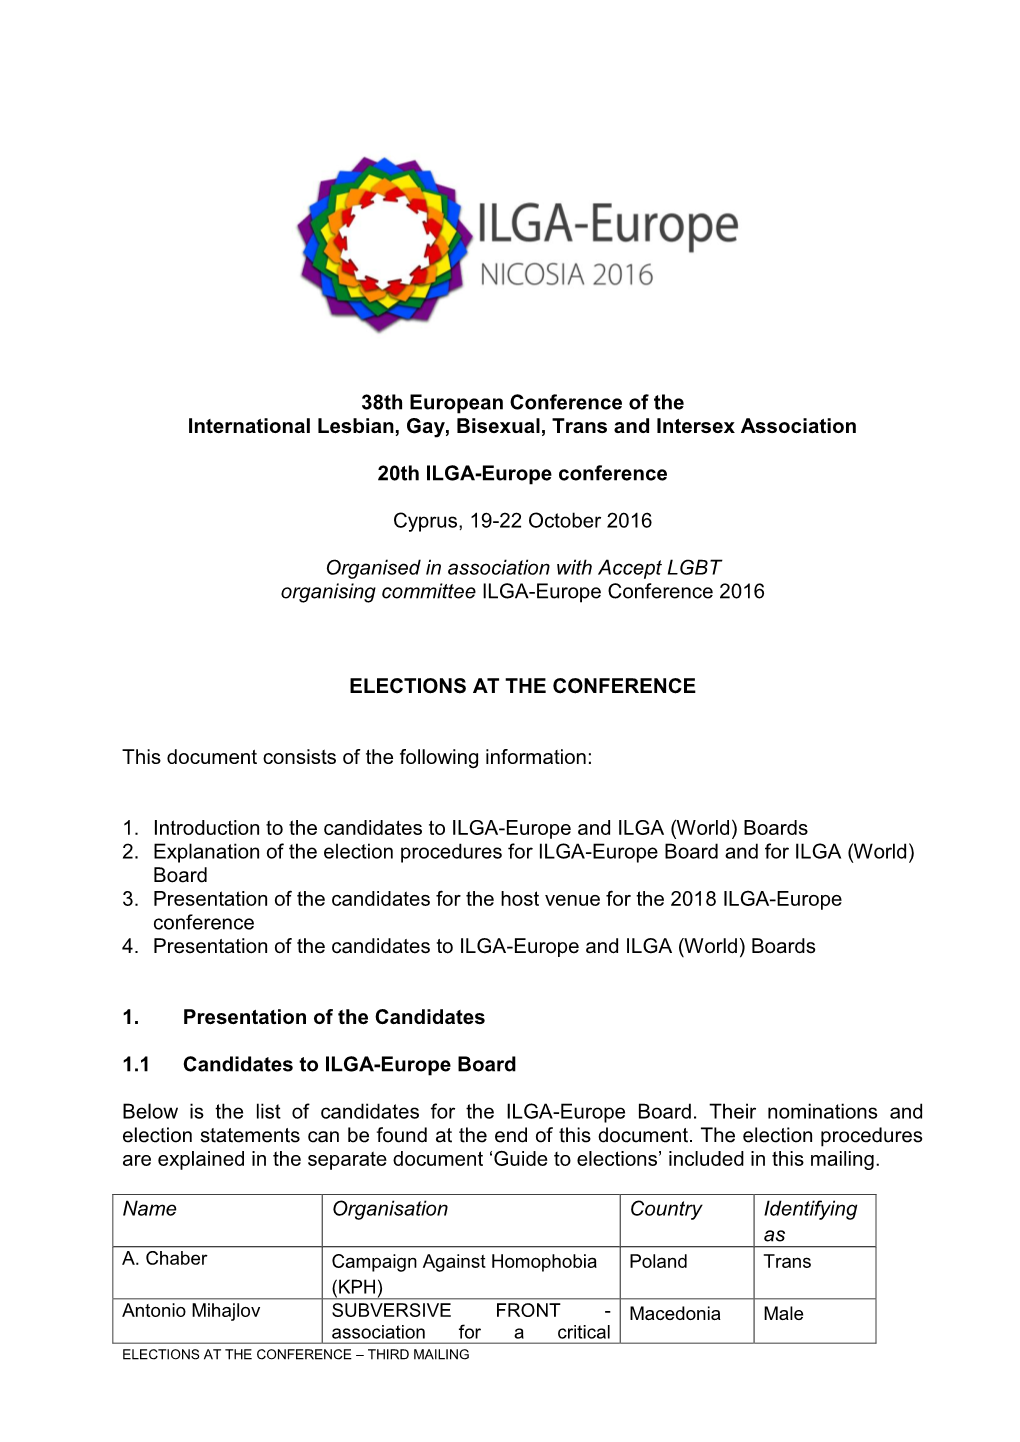 Details of Elections and Nominations for ILGA